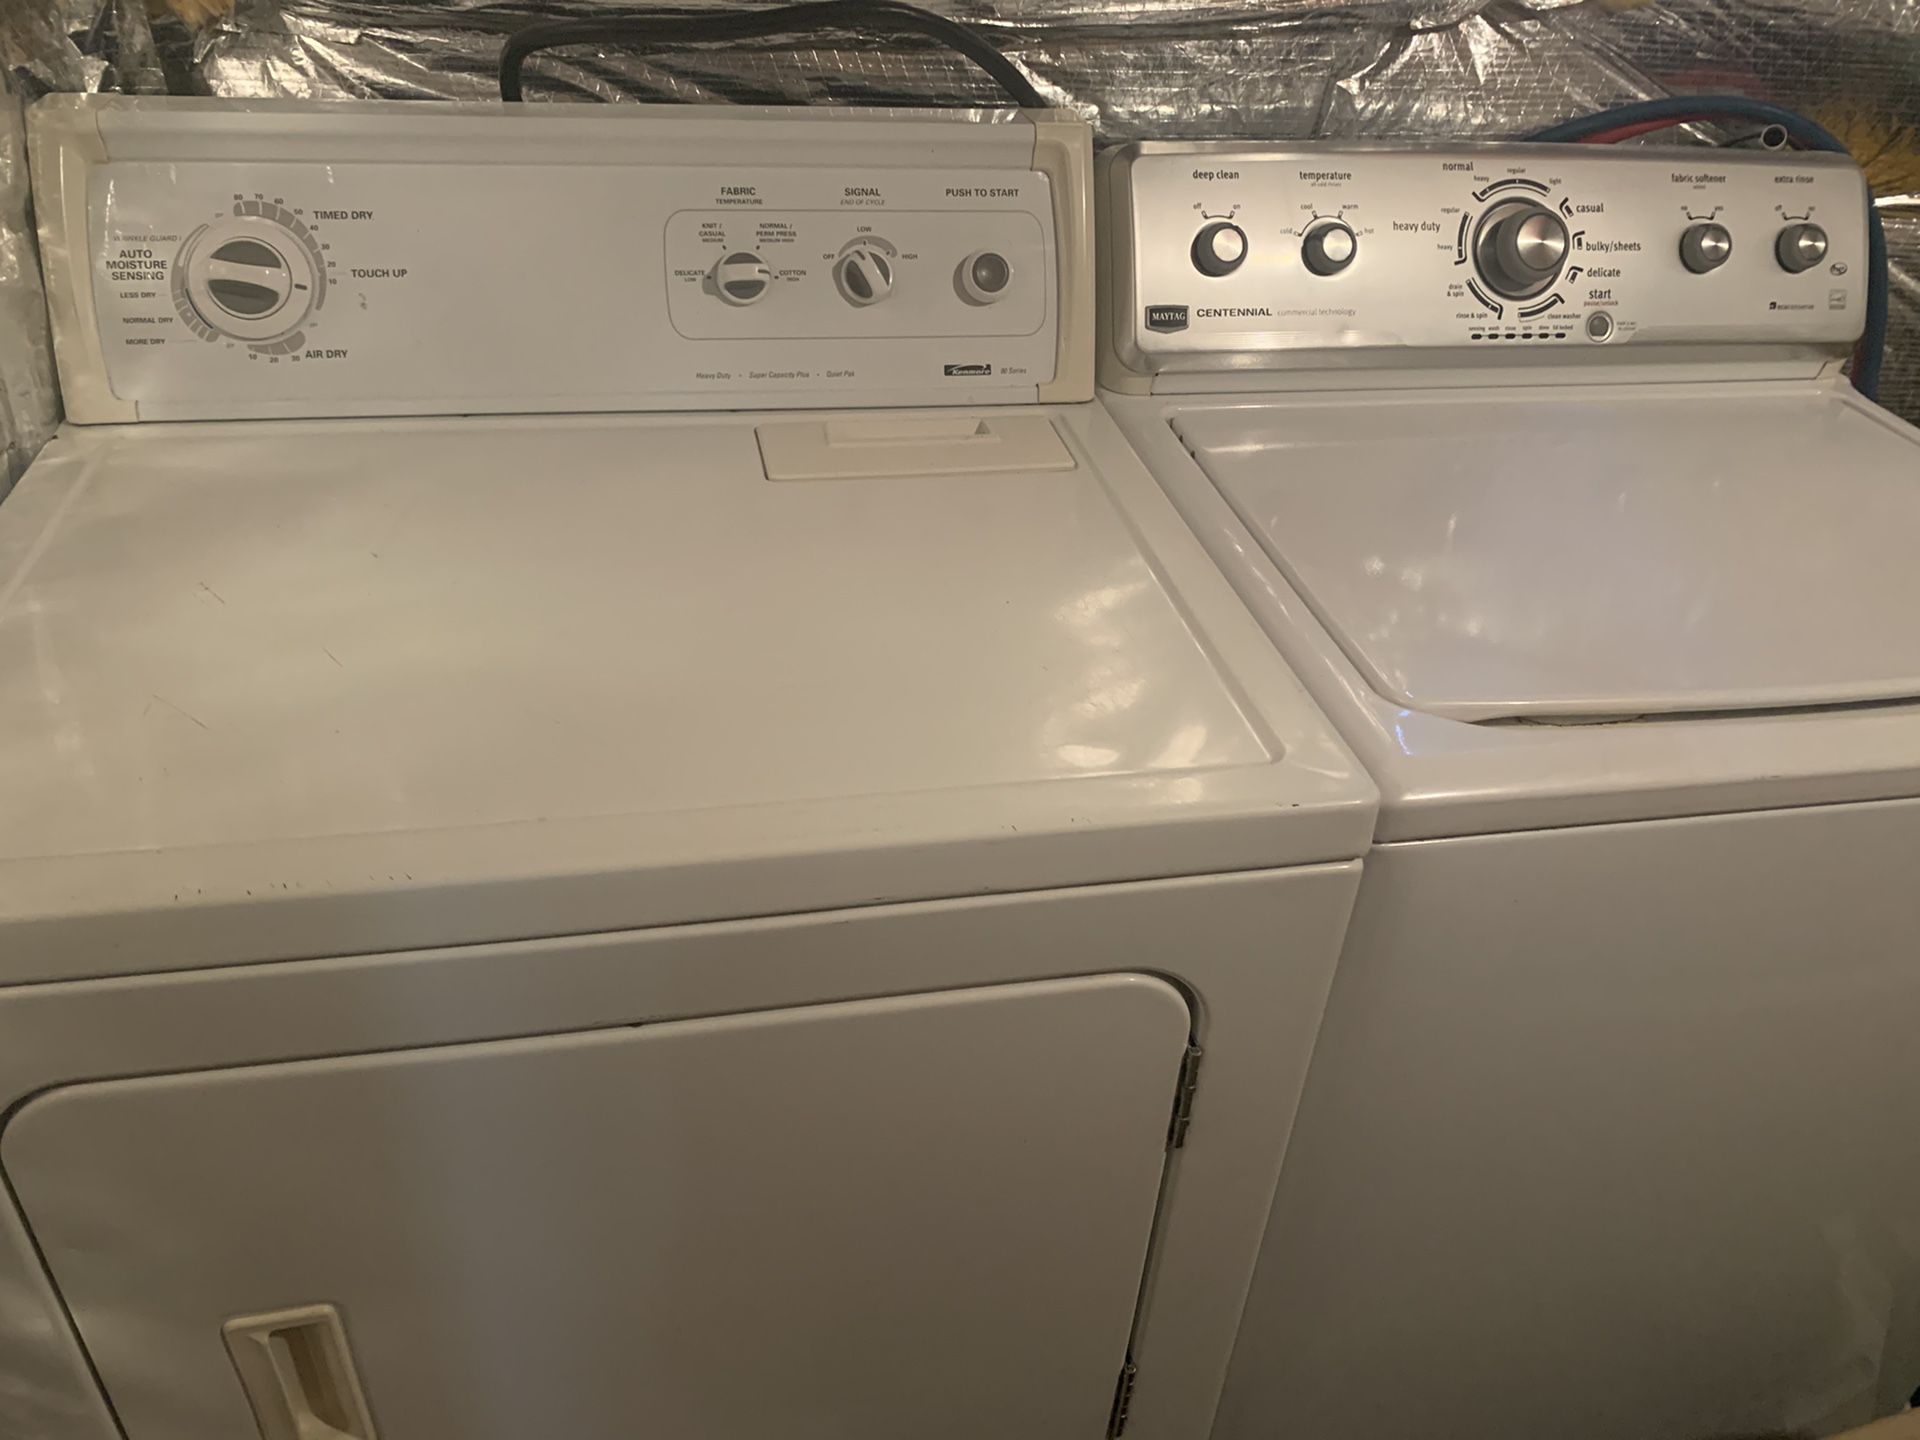 Maytag Washer and Kenmore Dryer